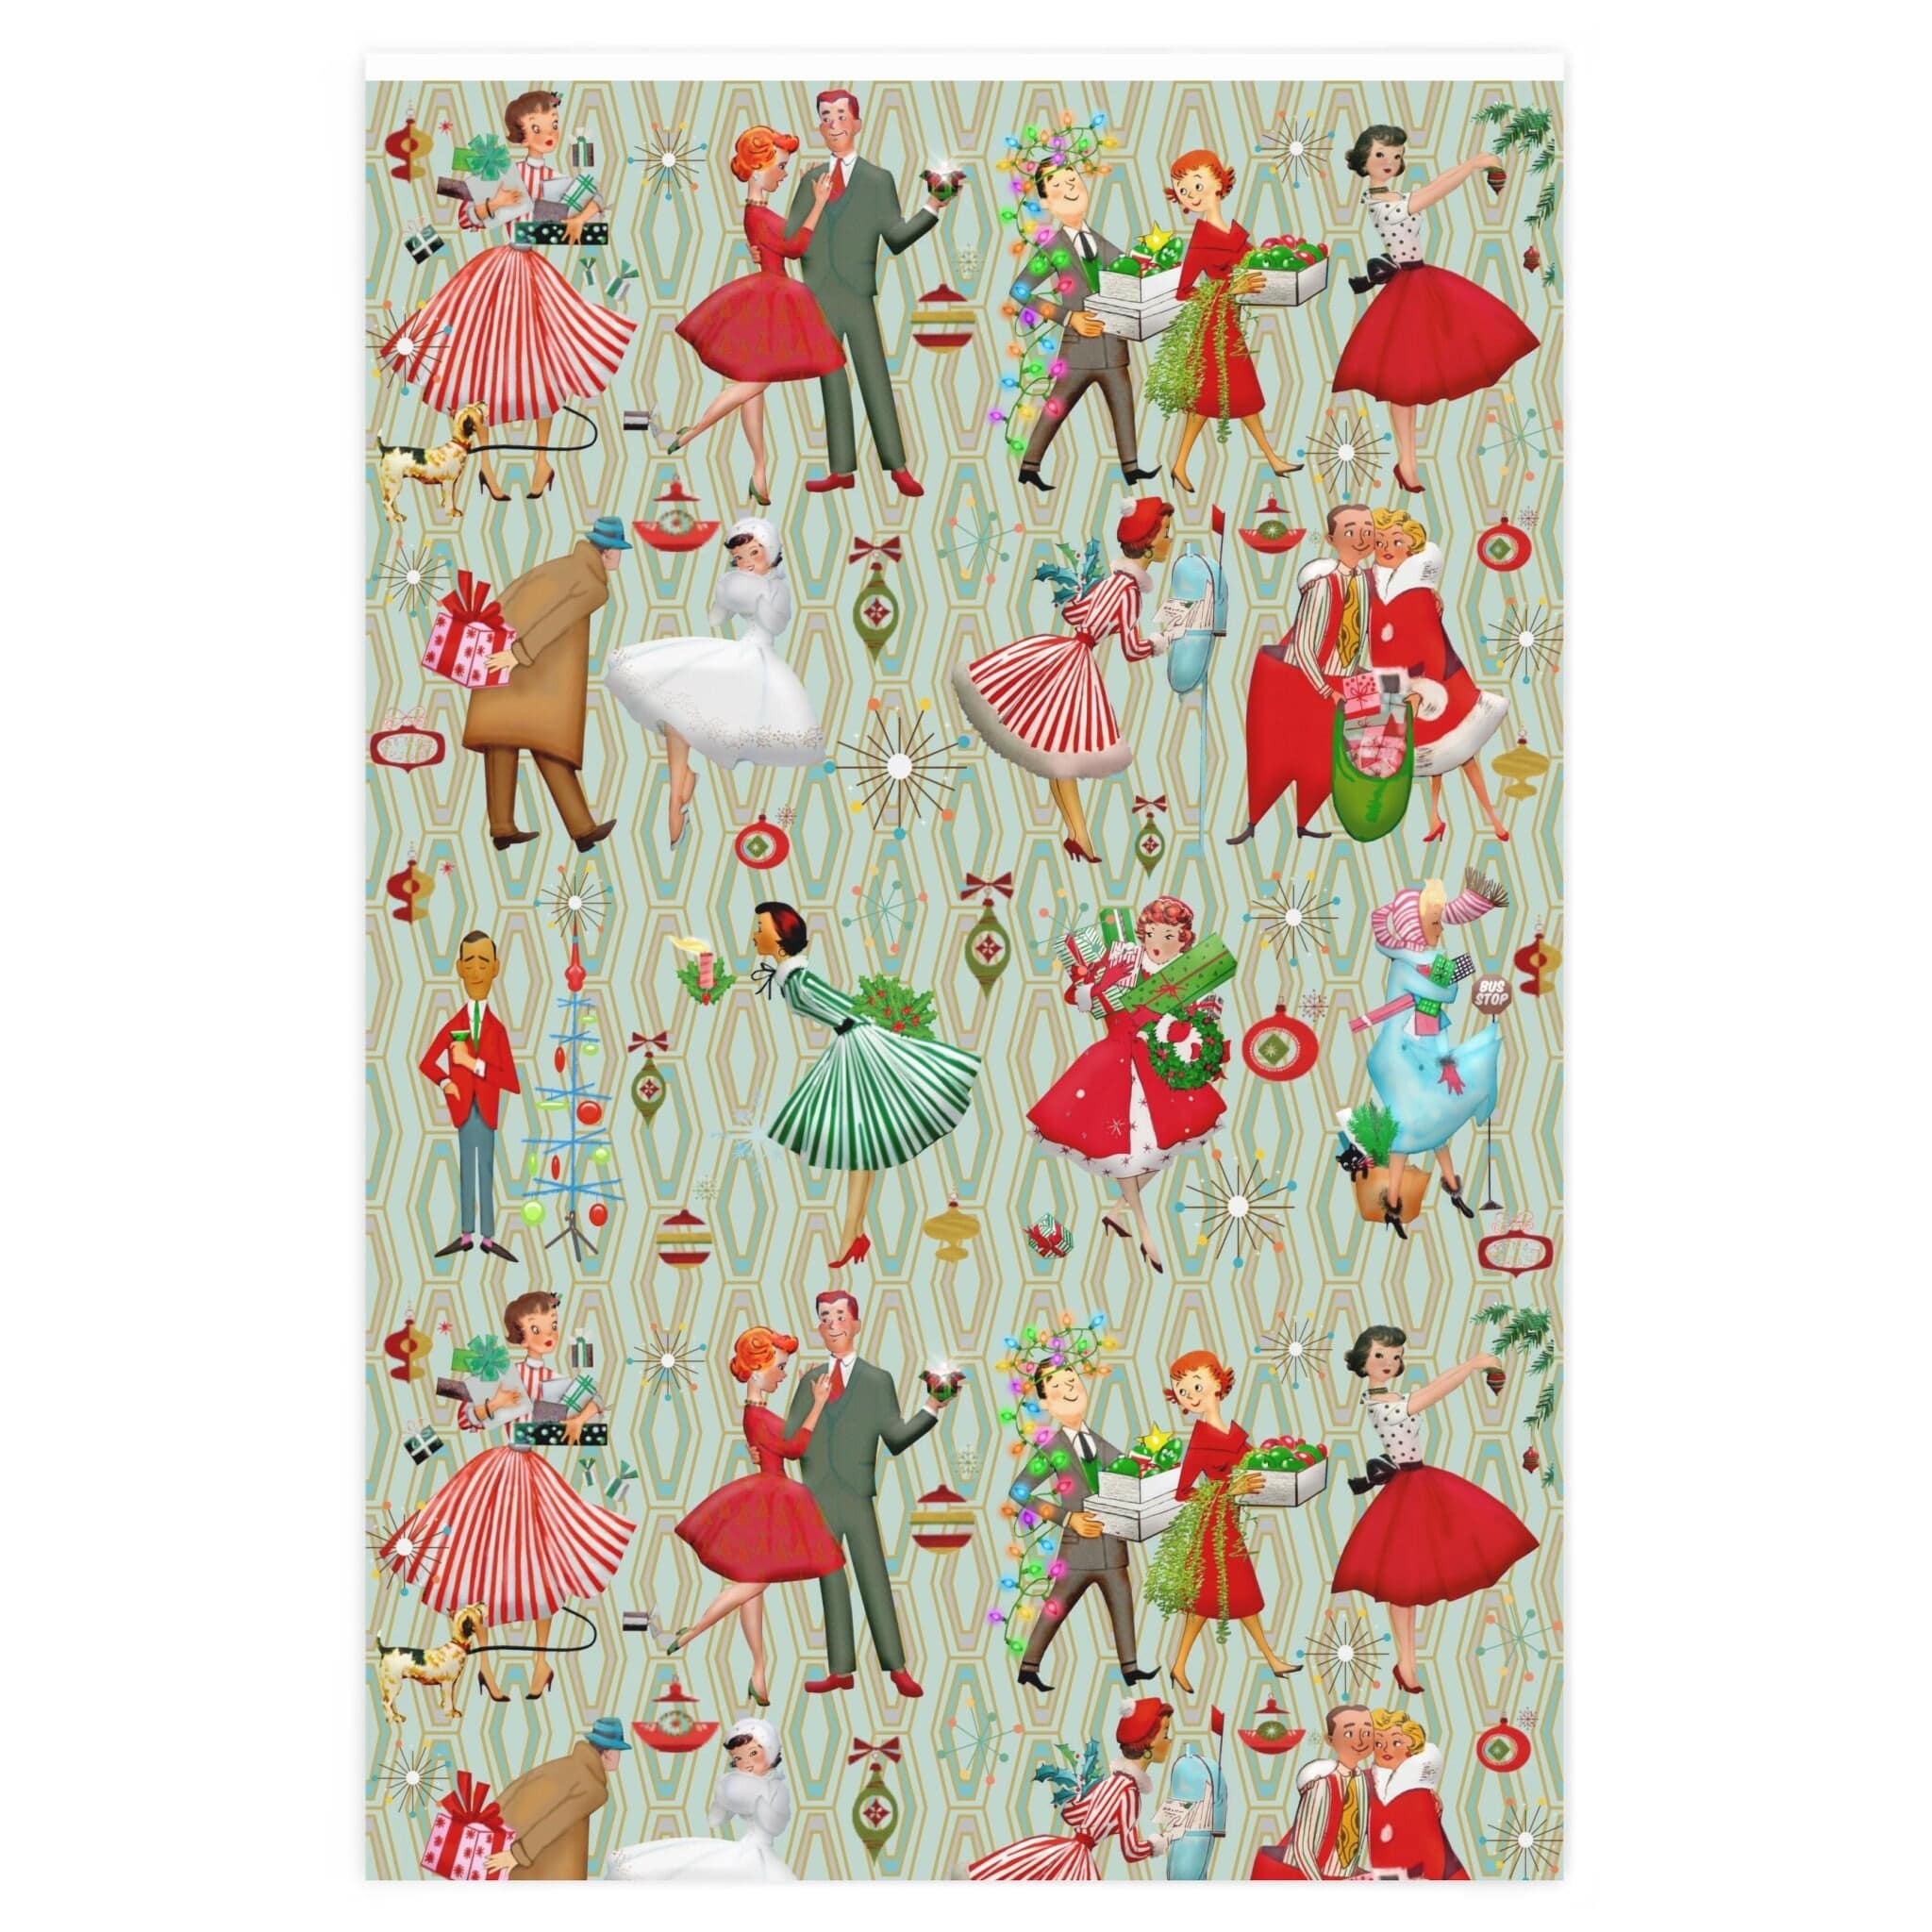 Kate McEnroe New York 1950s Retro Vintage Christmas Wrapping Paper, Mid Century Modern Retro Green, Red, Women, Ladies, Housewives Holiday Gift Wrap Seasonal &amp; Holiday Decorations